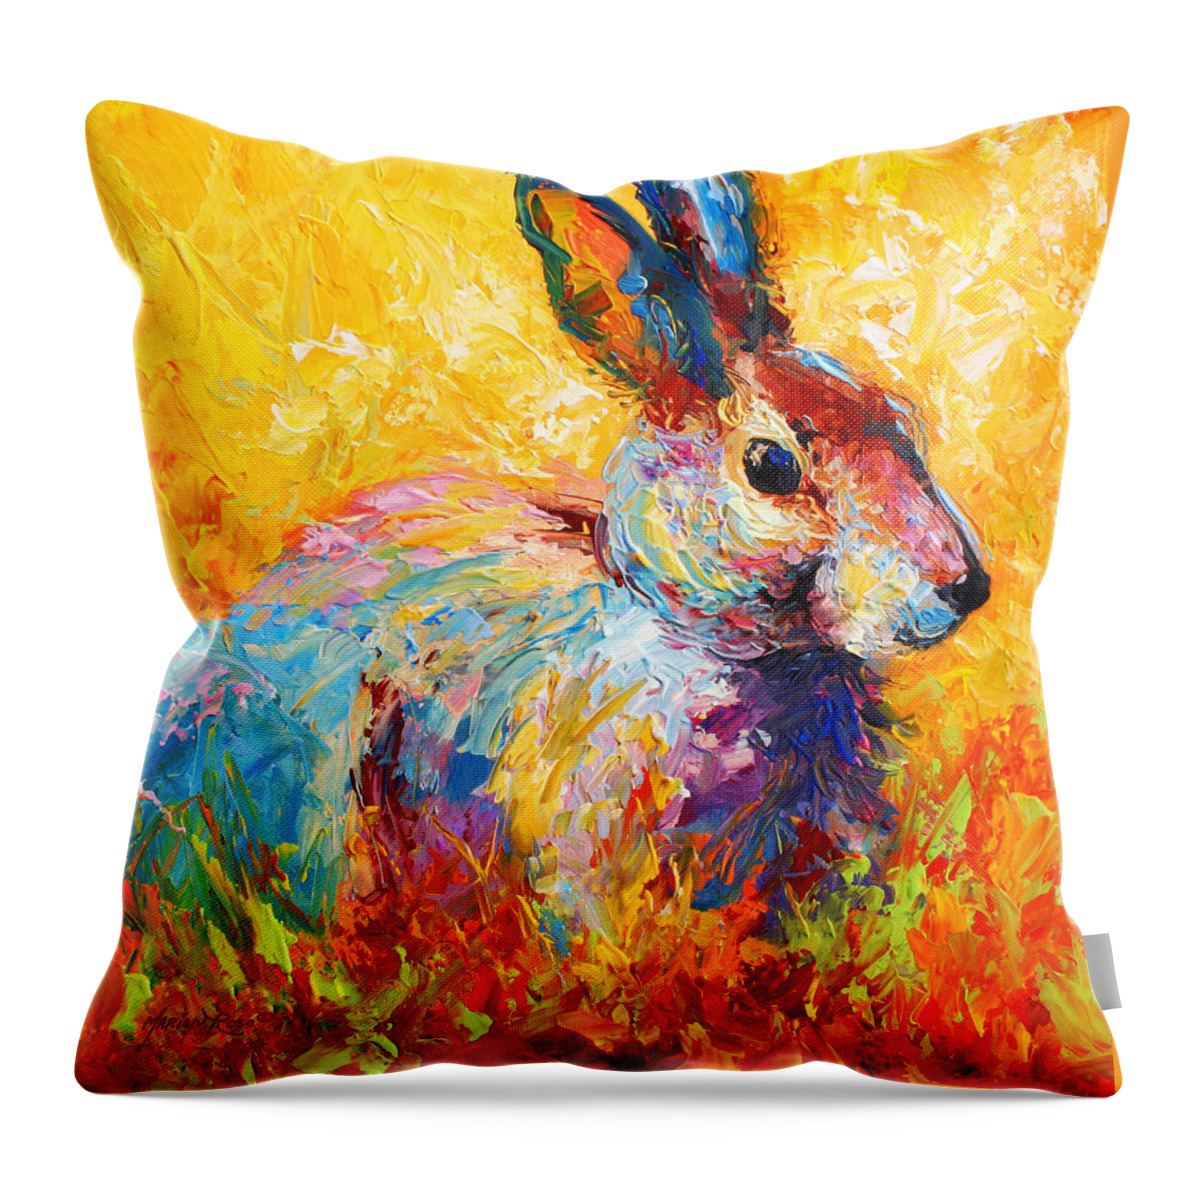 #faatoppicks Throw Pillow featuring the painting Forest Bunny by Marion Rose